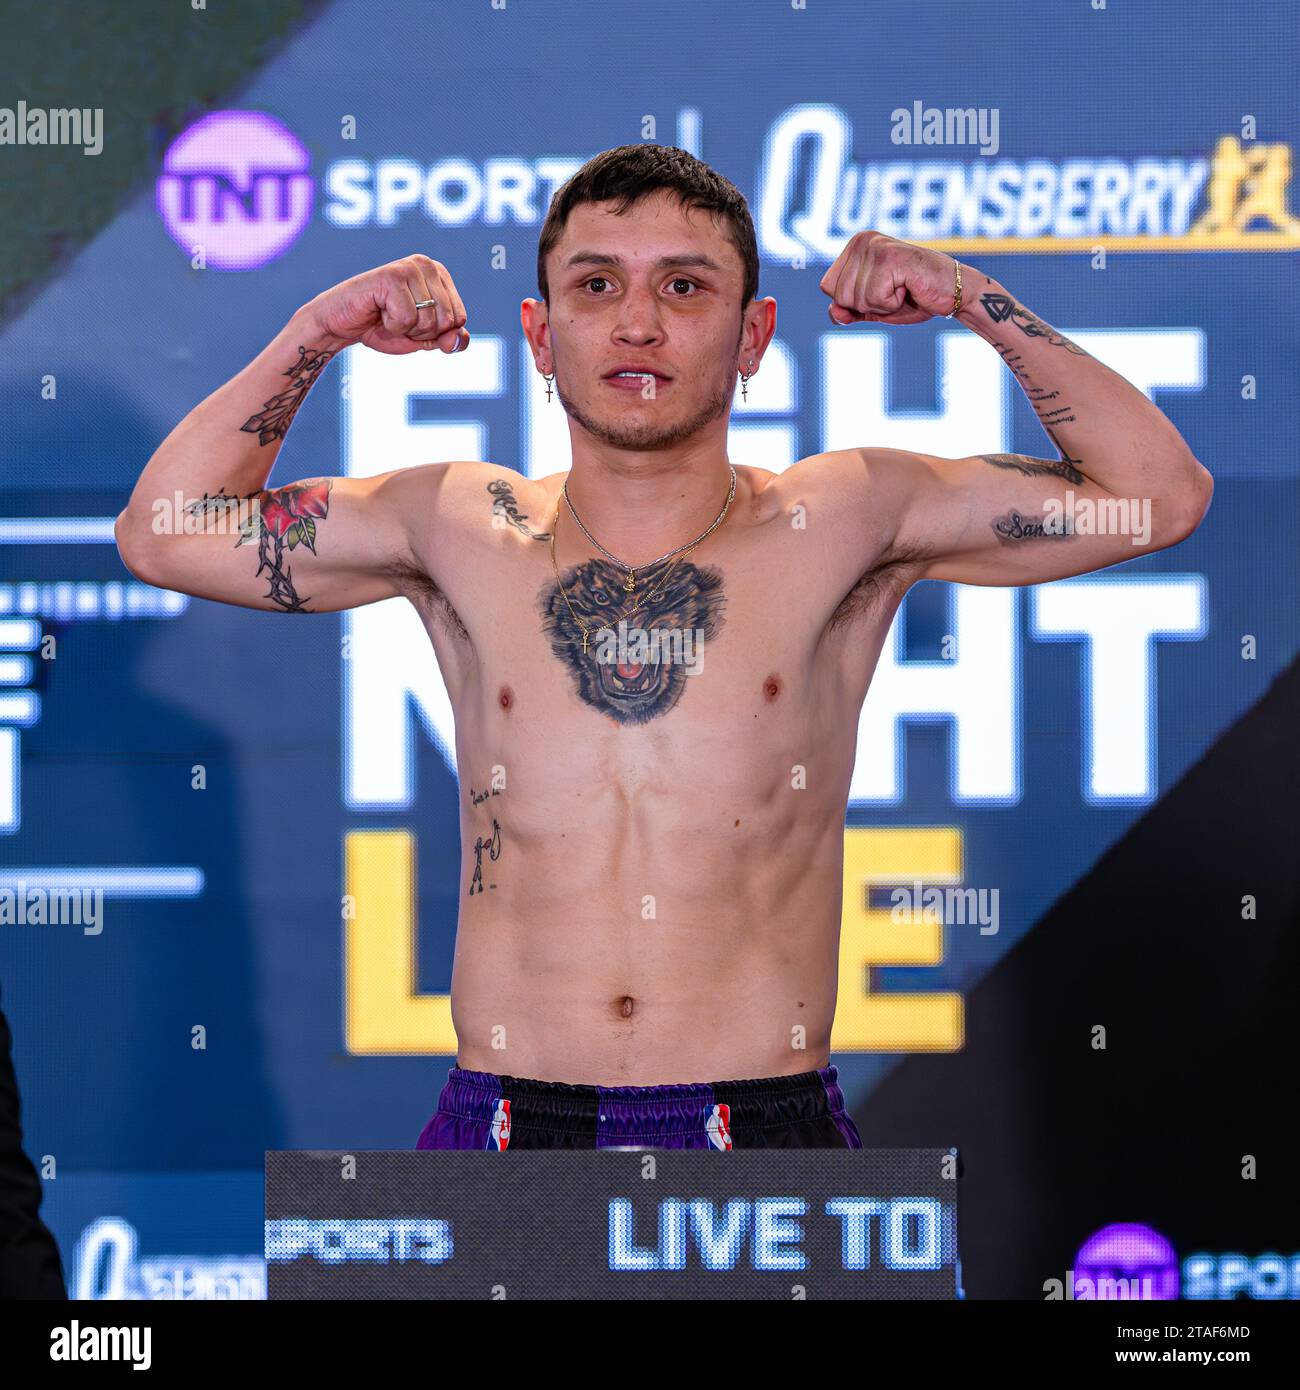 LONDON, UNITED KINGDOM. 30 Nov, 2023. Maicol Velazco during Queensberry Show Official Weigh-In at Hyatt Stratford on Thursday, November 30, 2023 in LONDON, ENGLAND. Credit: Taka G Wu/Alamy Live News Stock Photo